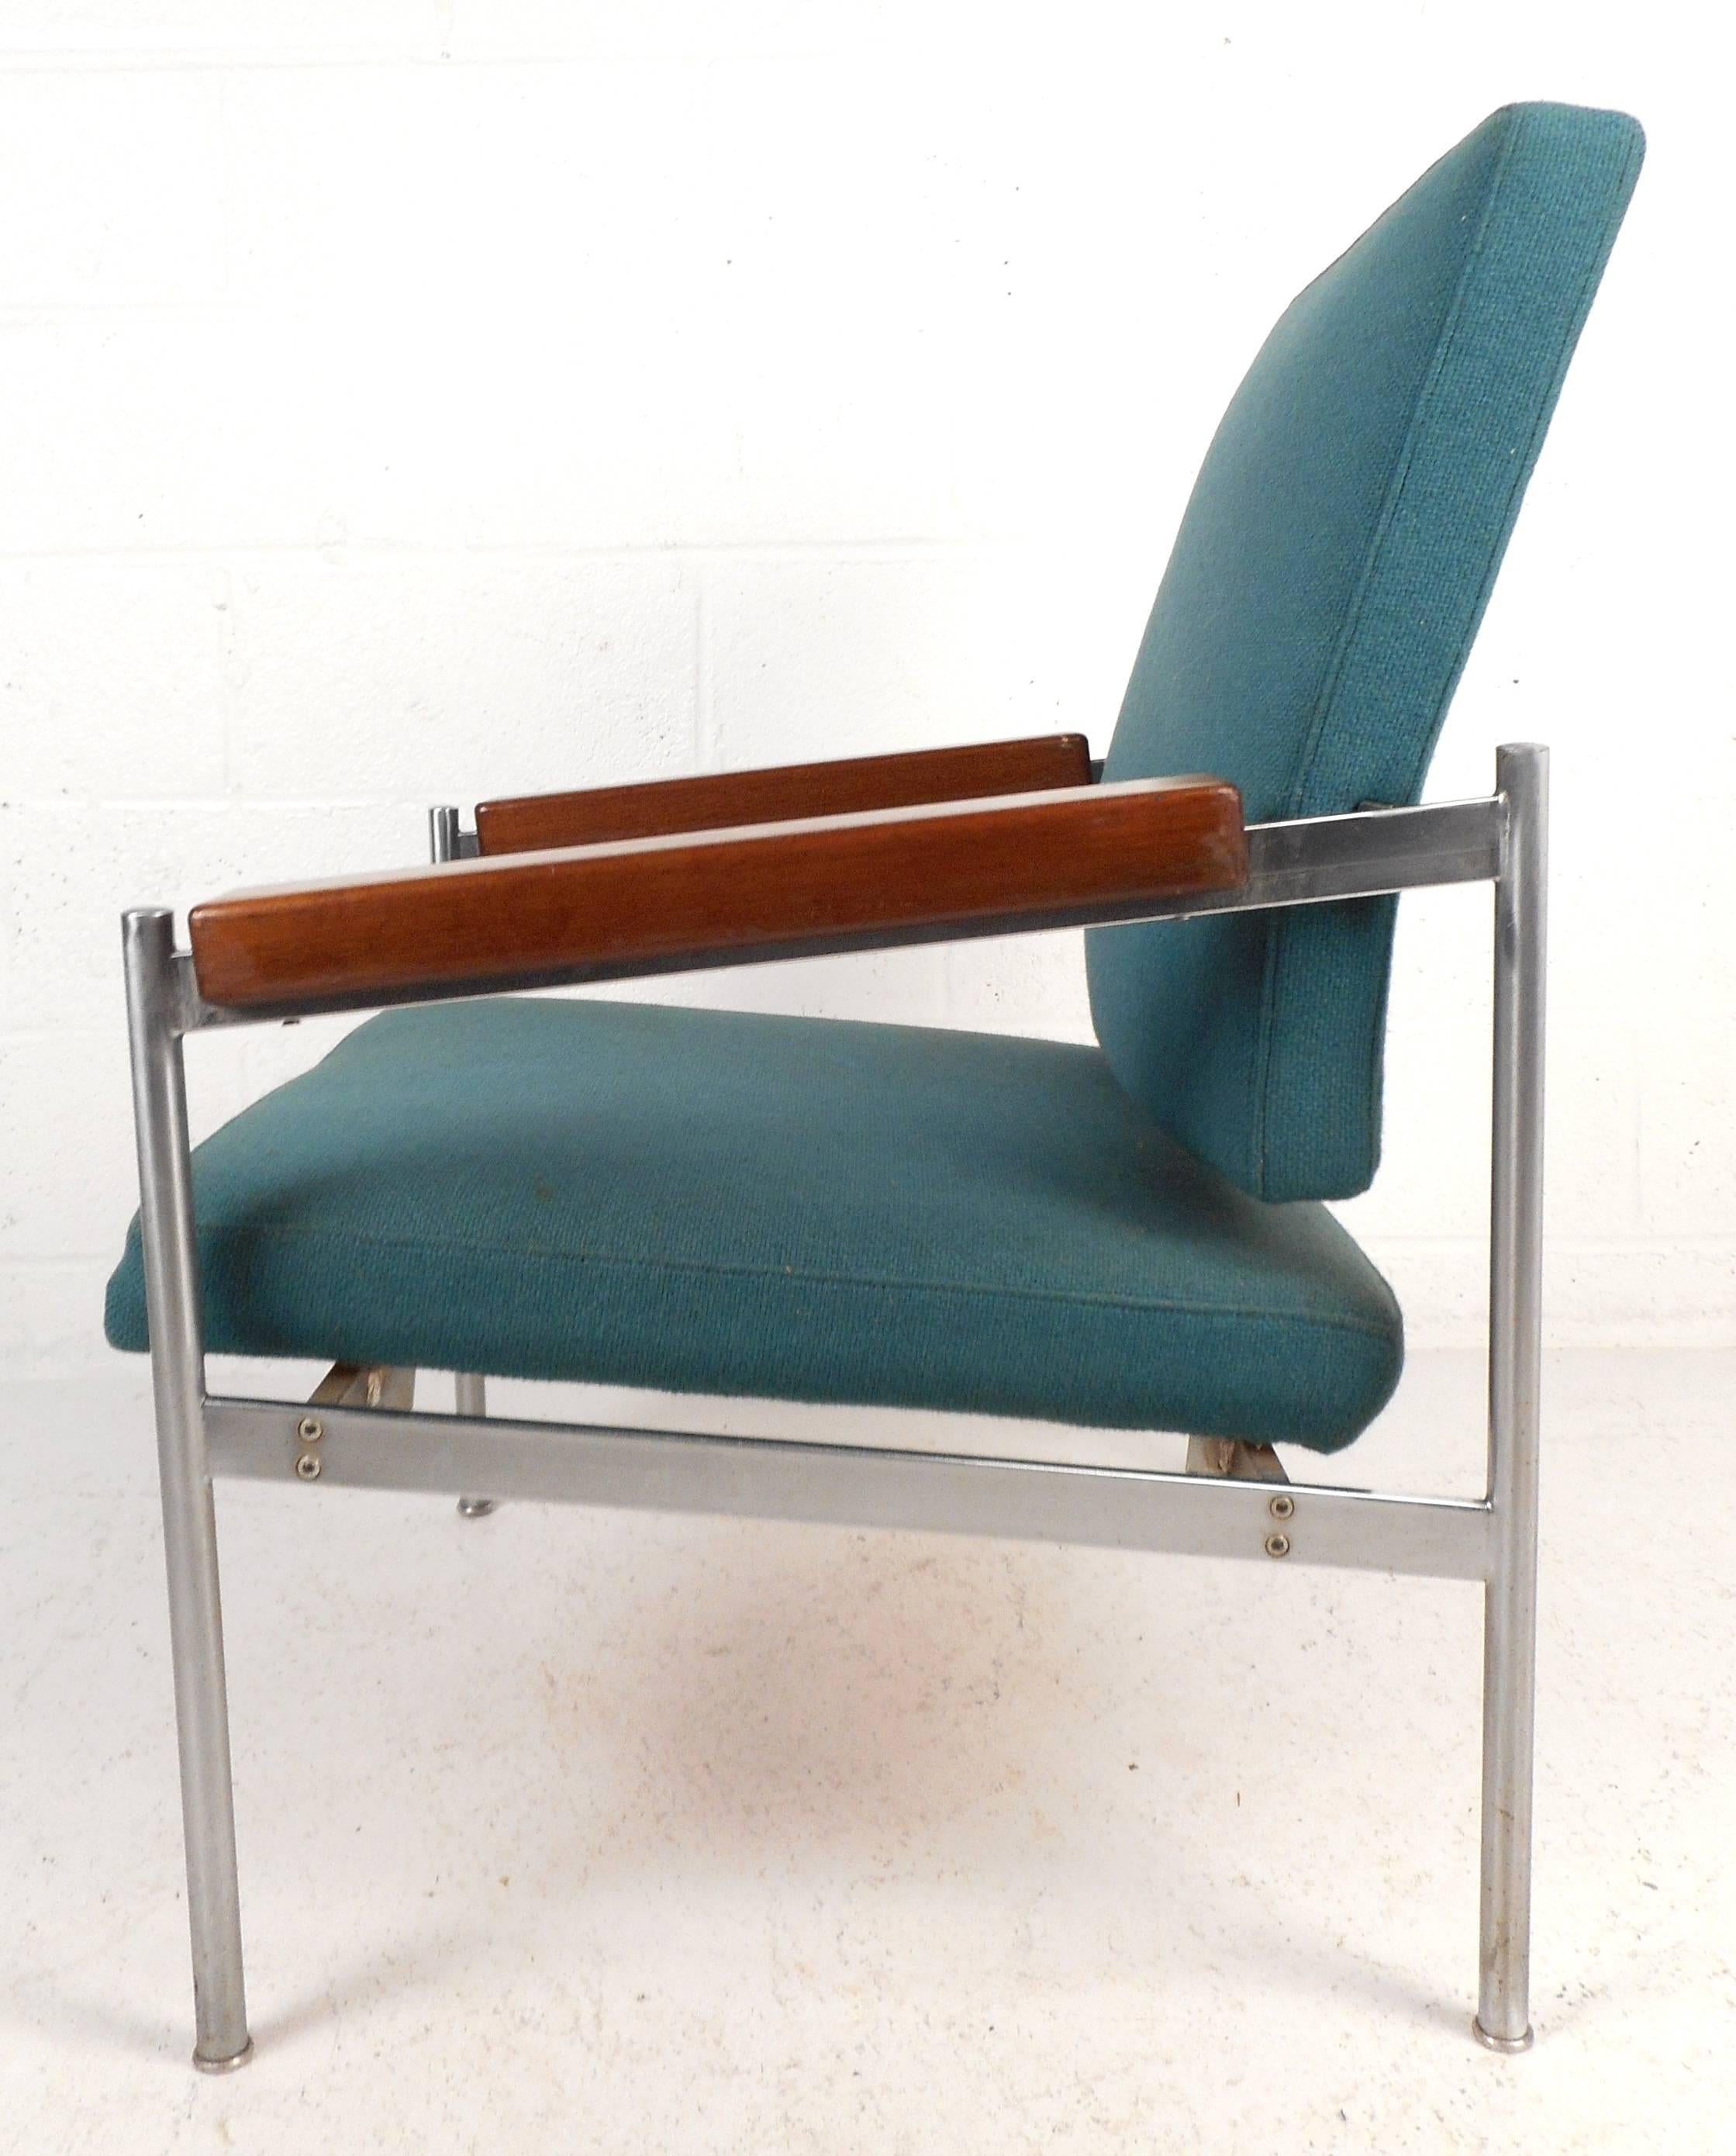 Stunning vintage modern lounge chair features stylish slanted wood armrests and aqua blue upholstery. Unusual combination of chrome, fabric, and wood adding to the allure. This Danish arm chair is sure to add style and grace to any seating